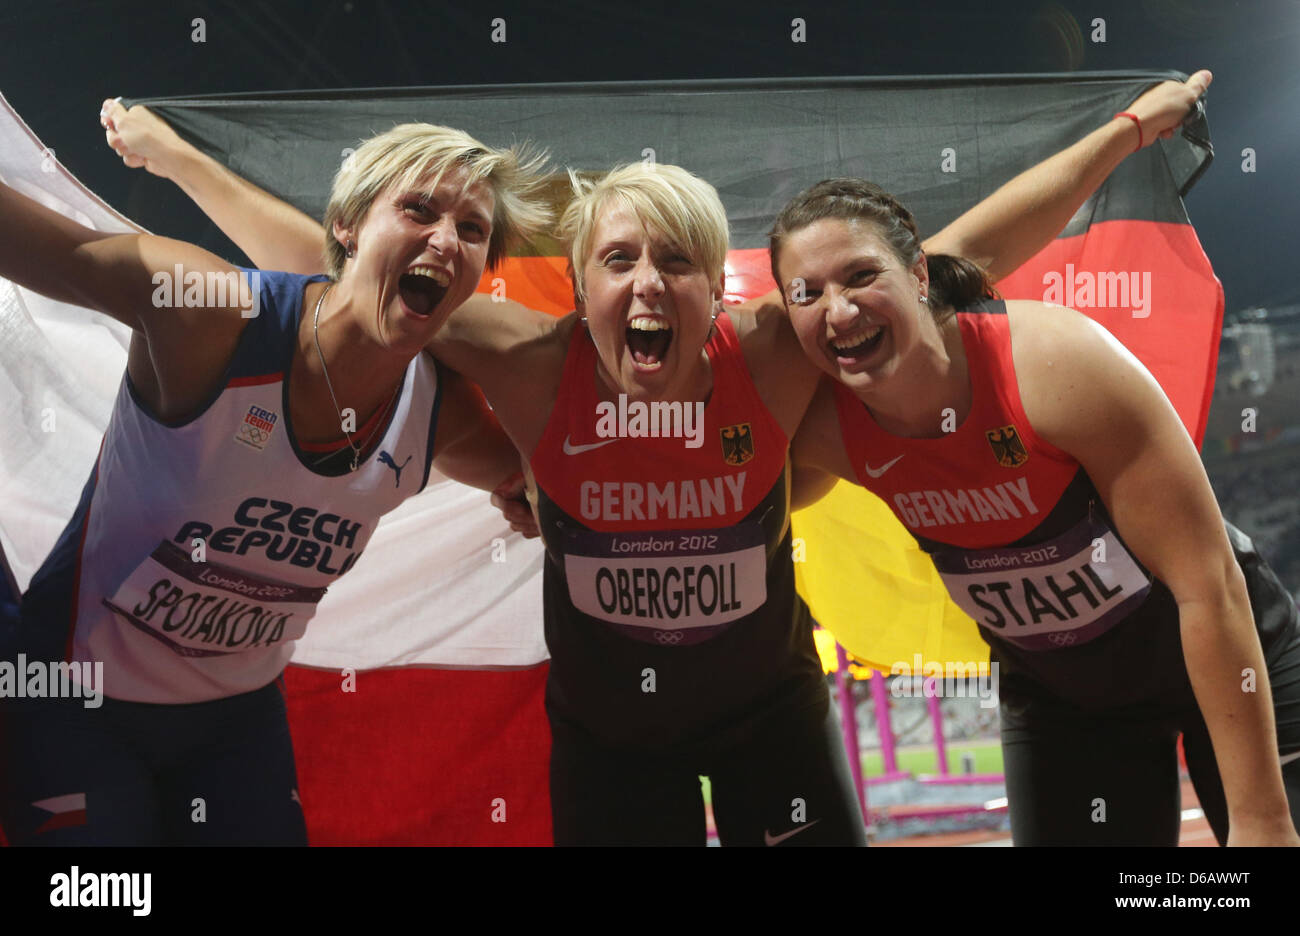 Gold mdedalist Barbora Spotakova (L-R) of Czech Republic, silver medalist Christina Obergfoell and bronze medalist Linda Stahl of Germany celebrate after the Women's Javelin Throw final at the London 2012 Olympic Games Athletics, Track and Field events at the Olympic Stadium, London, Great Britain, 09 August 2012. Photo: Michael Kappeler dpa  +++(c) dpa - Bildfunk+++ Stock Photo